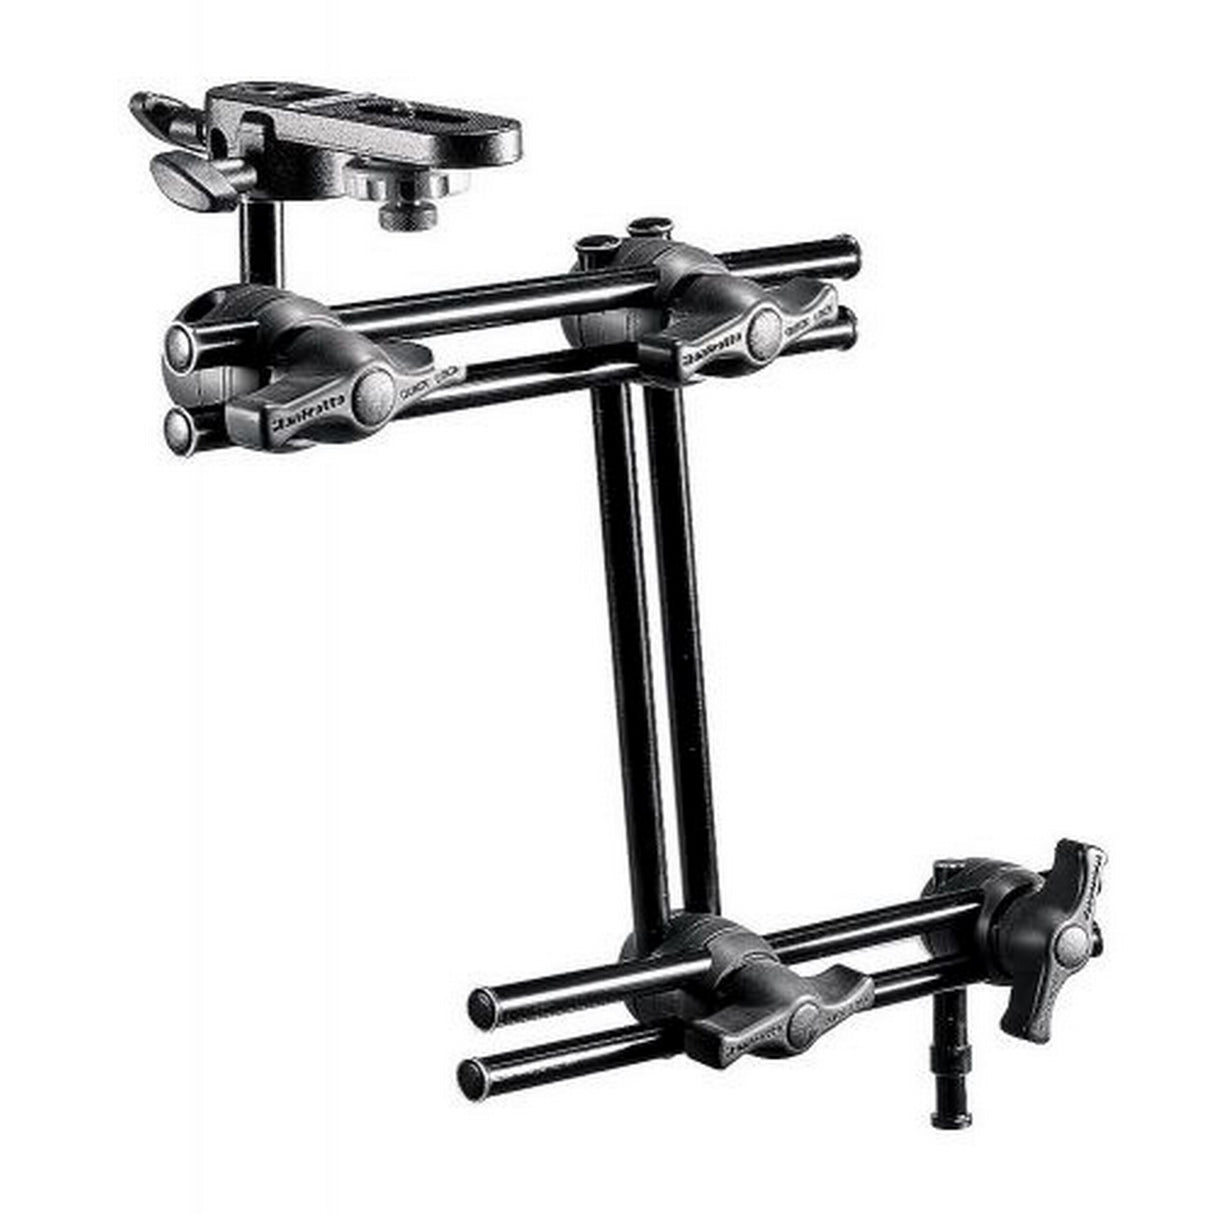 Manfrotto 396B-3 3-Section Double Articulated Arm with Camera Bracket